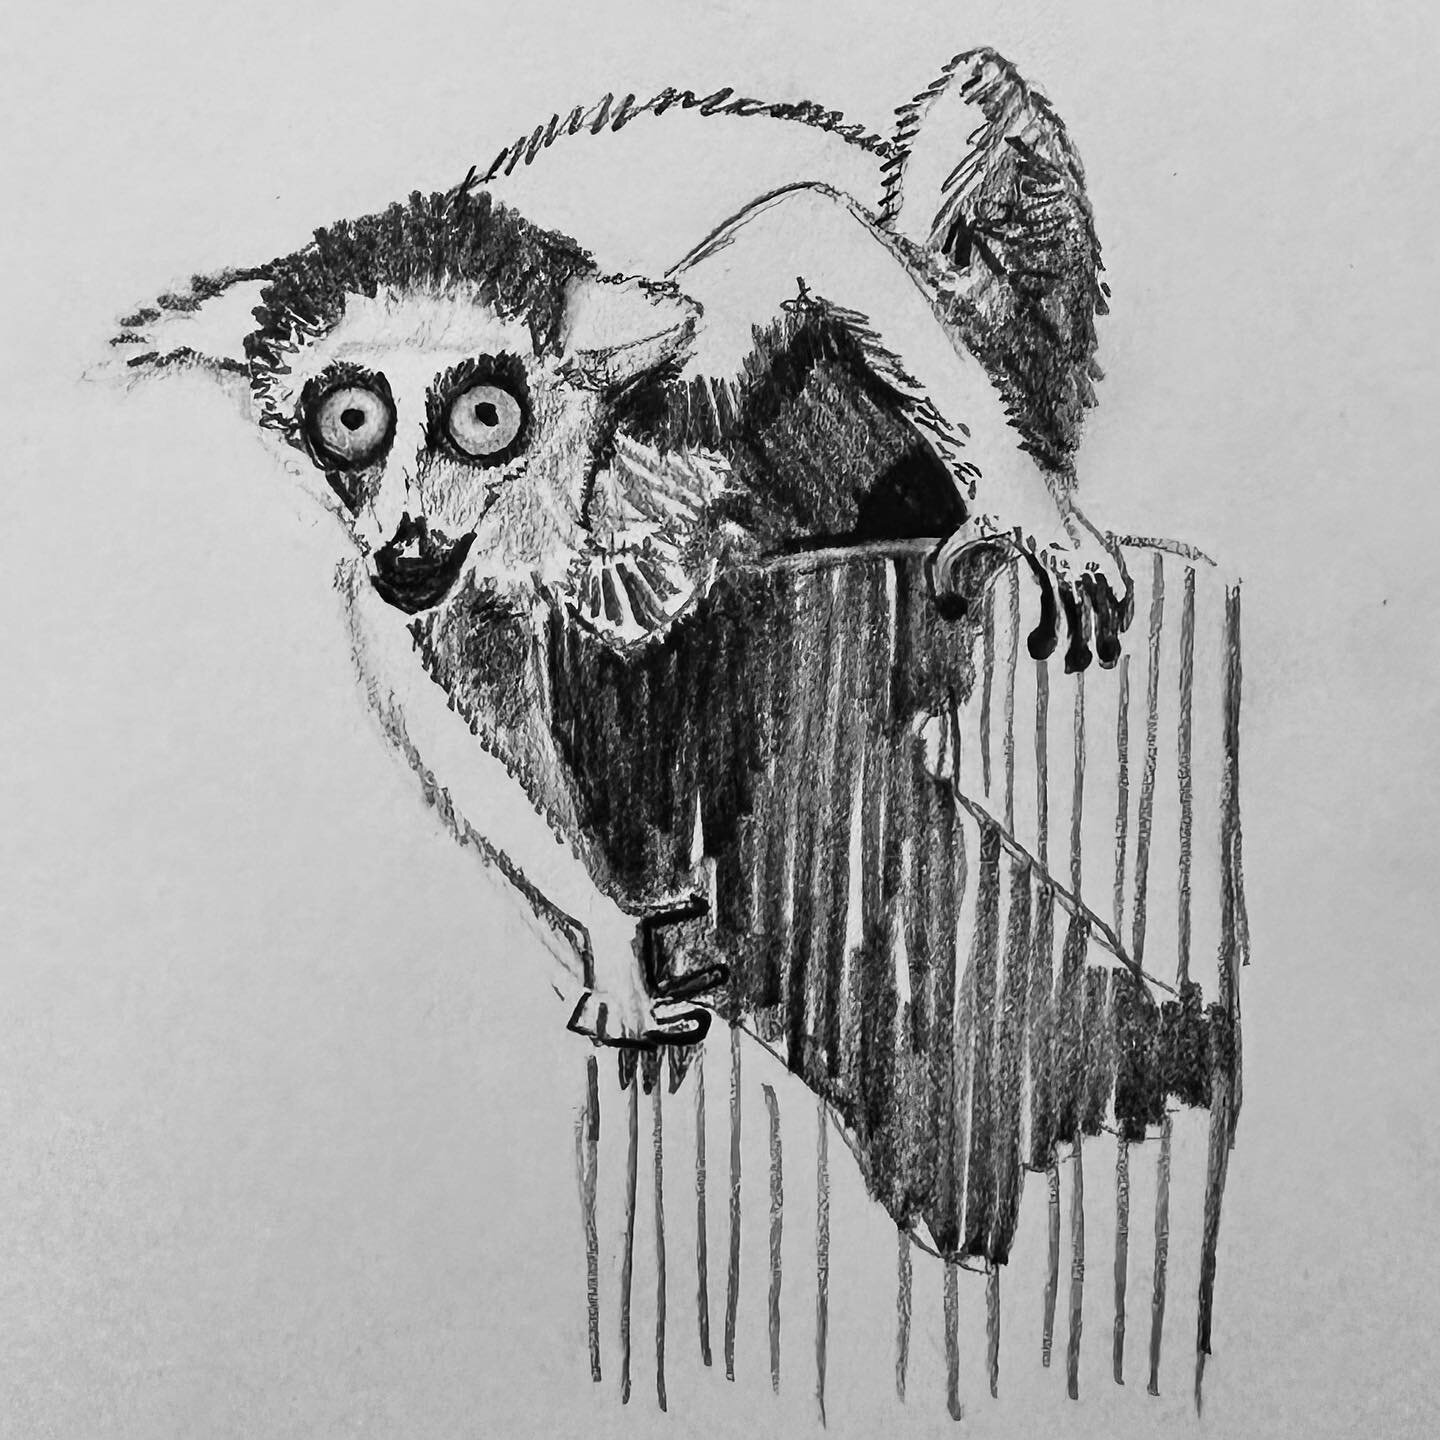 A big thank you to Pan from @greendoorstudios for a fun multi-block linocut workshop earlier this week. I took some drawings of the gorgeous lemurs from @peakwildlifepark to play around with. Looking forward to cutting out some more blocks and playin